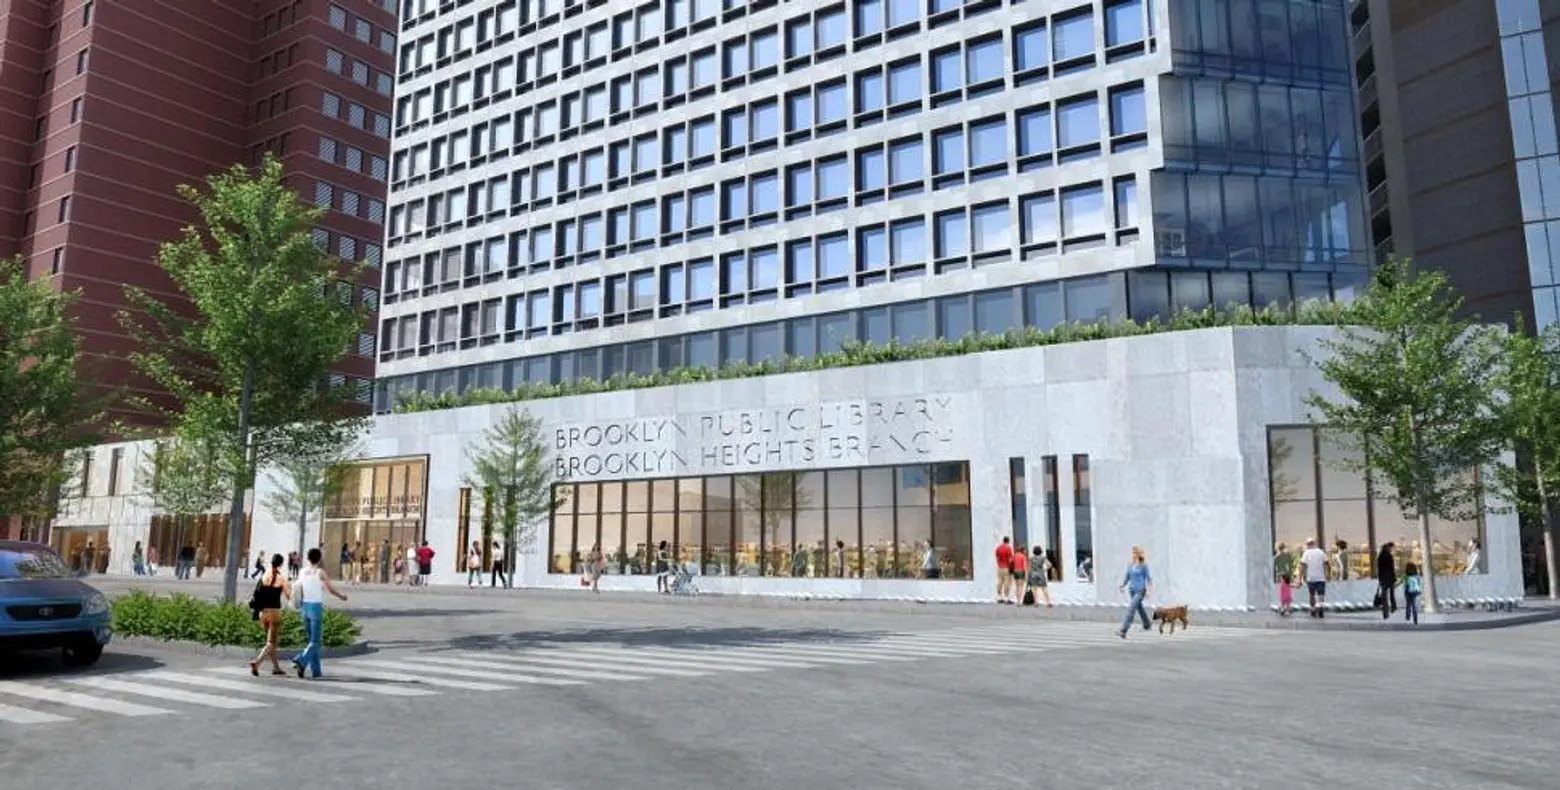 Brooklyn Public Library, Brooklyn Heights library, Hudson Companies, Marvel Architects 